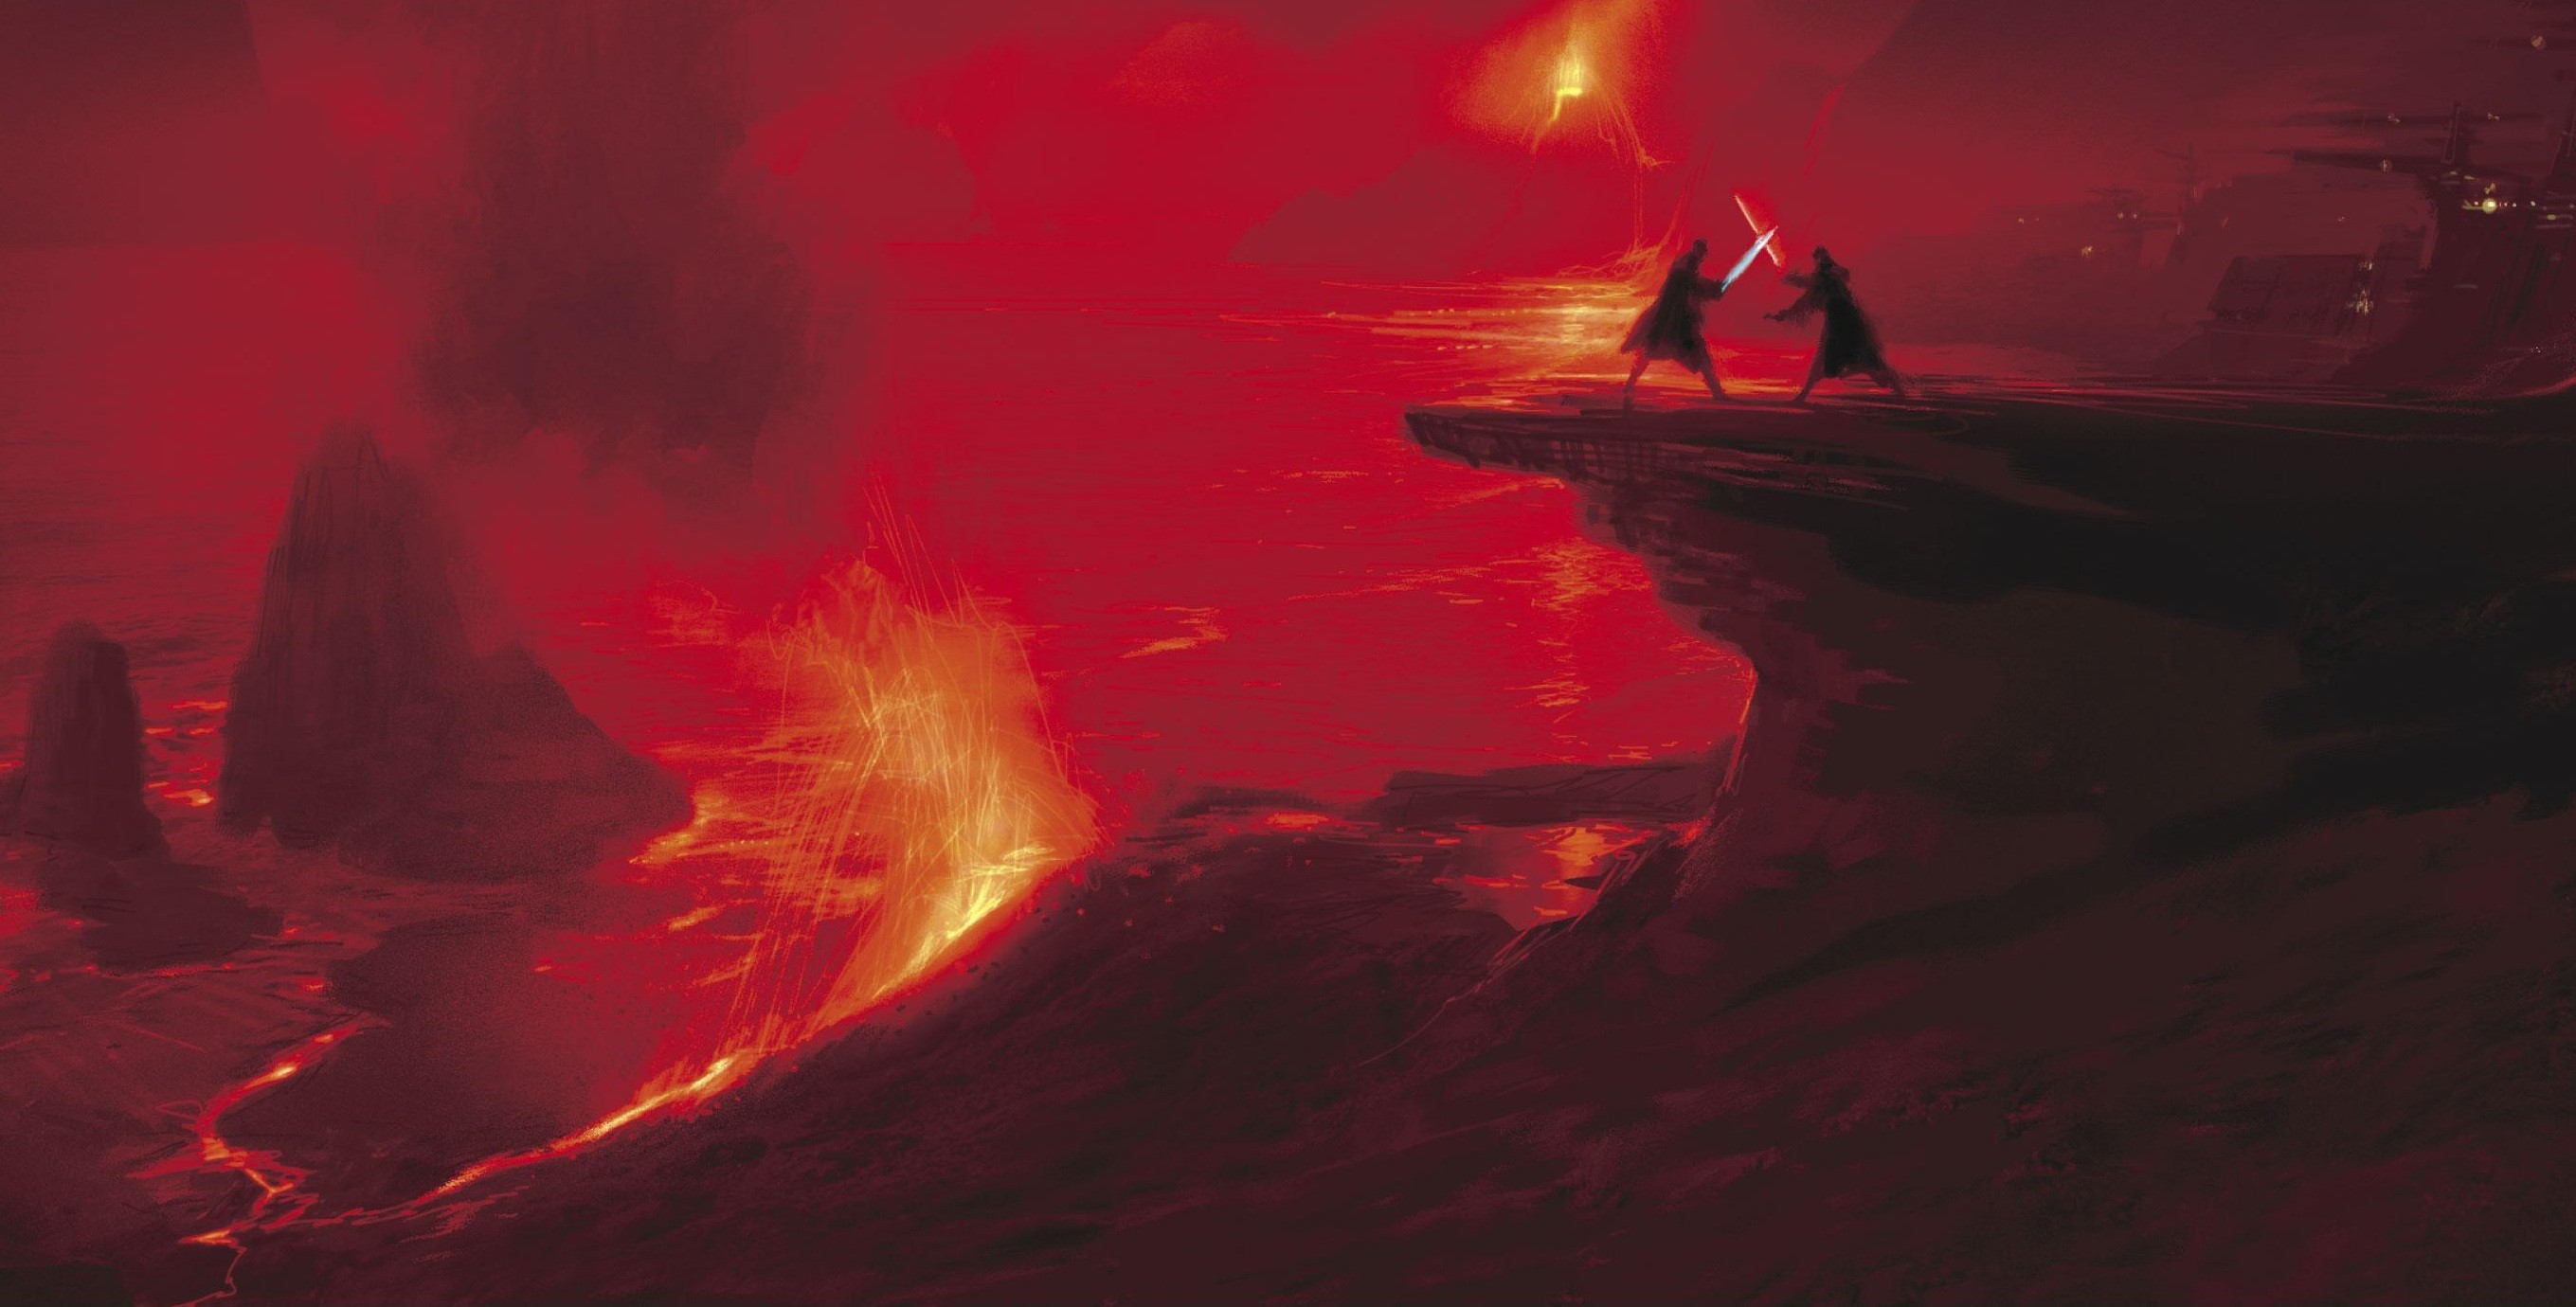 General 2719x1380 Star Wars artwork Darth Vader lightsaber science fiction Jedi Sith Star Wars: Episode III - The Revenge of the Sith concept art lava volcano red